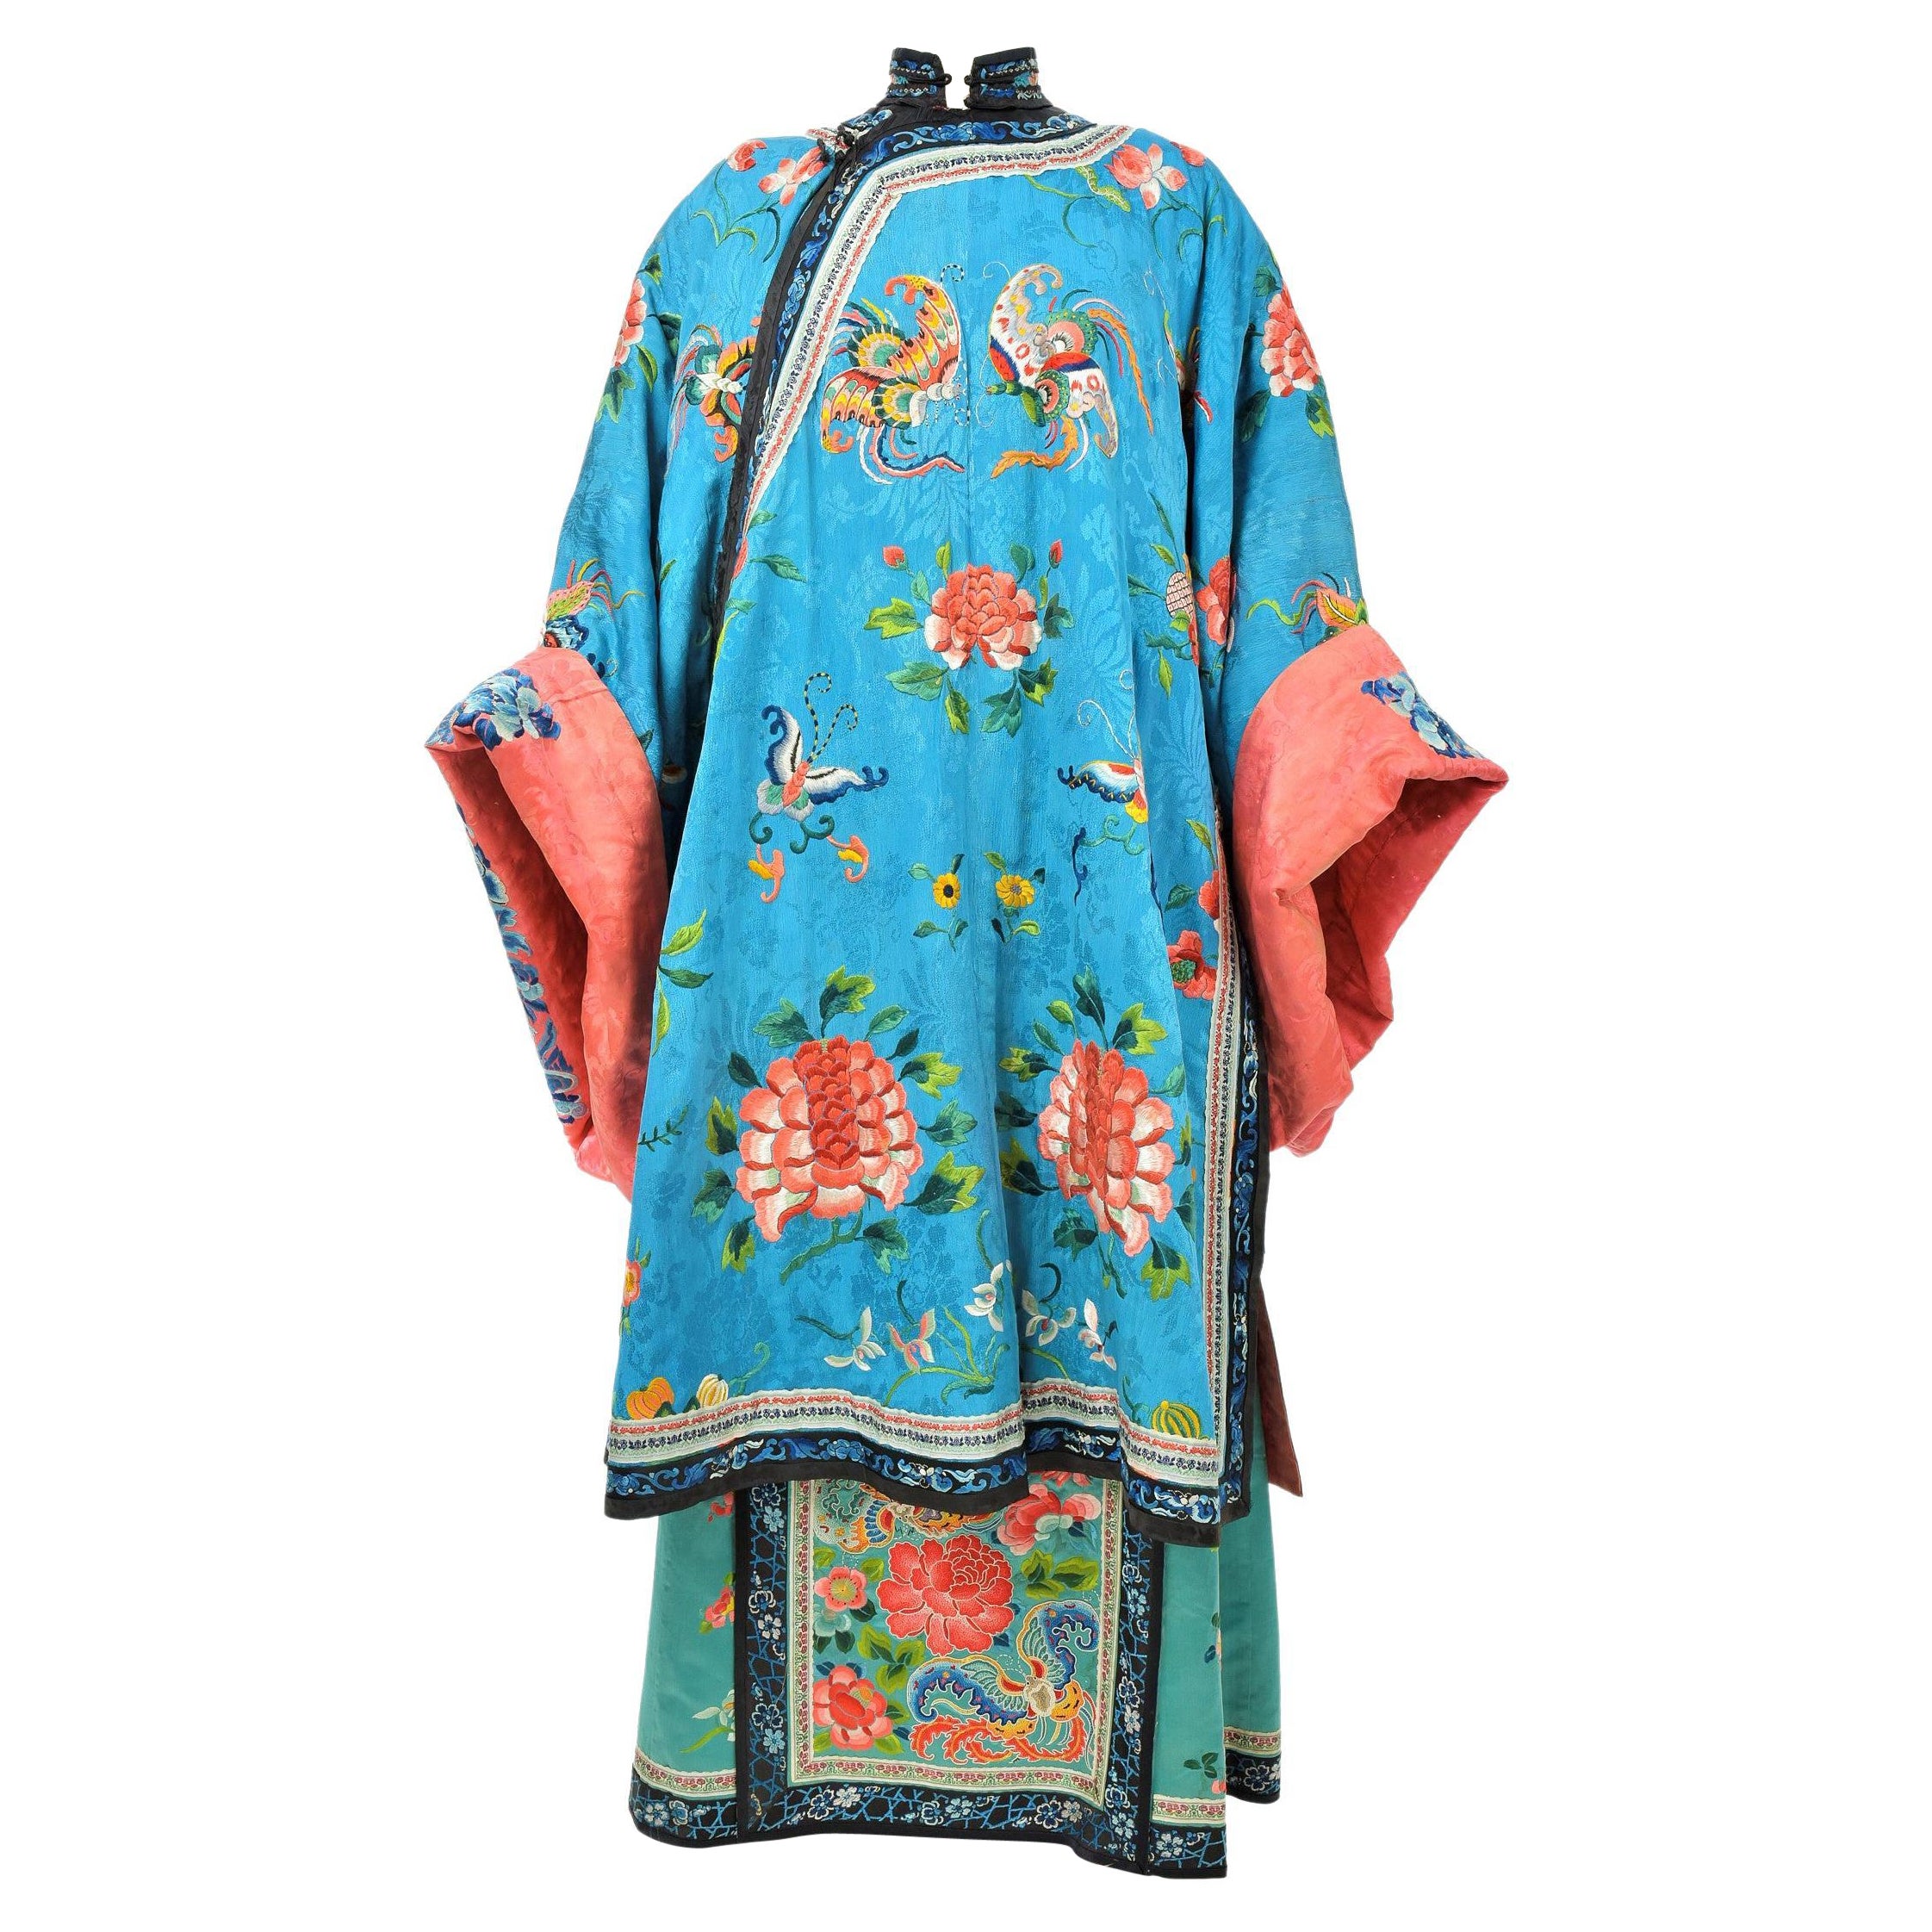 Semi Formal Silk Embroidered Manchu Woman's Skirt and Dress Qing period C.1900